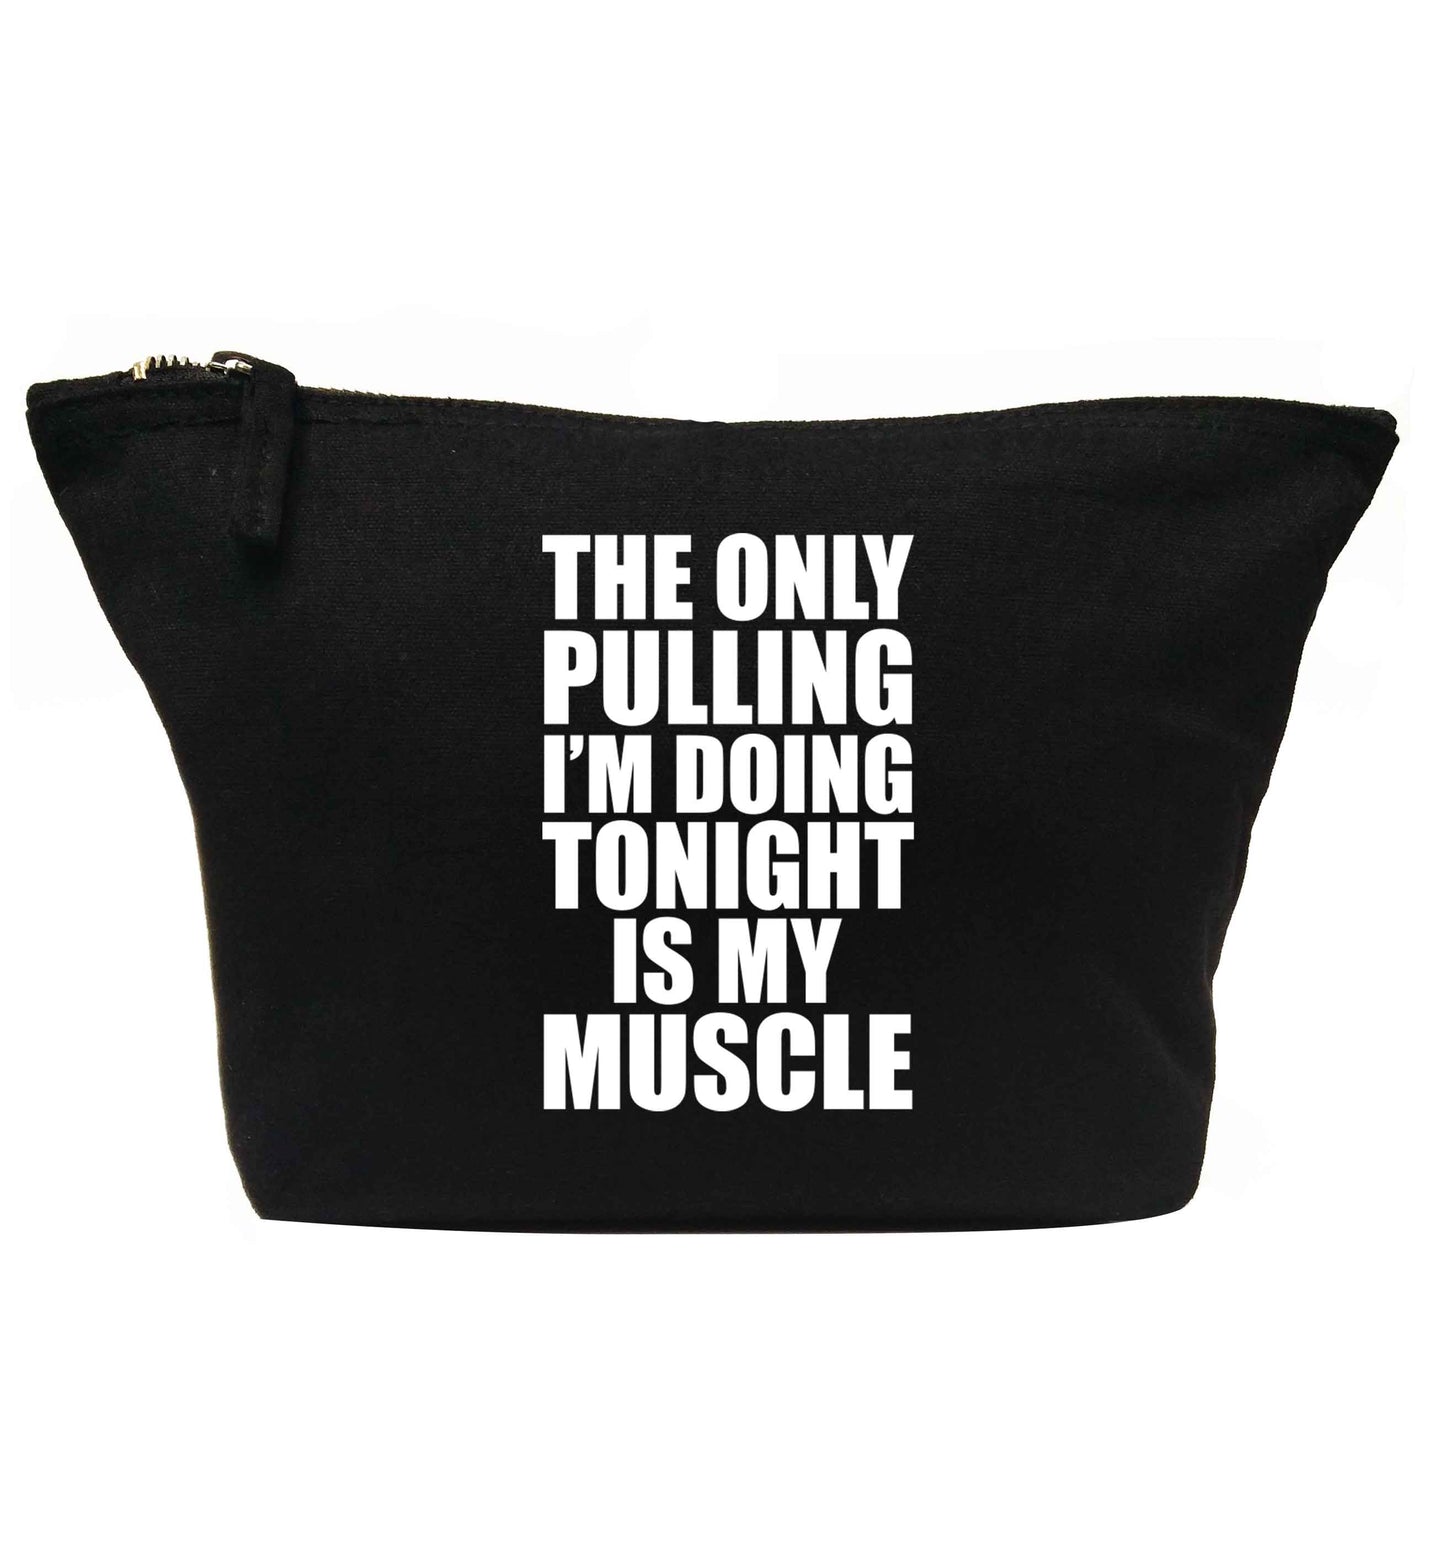 The only pulling I'm doing tonight is my muscle | Makeup / wash bag